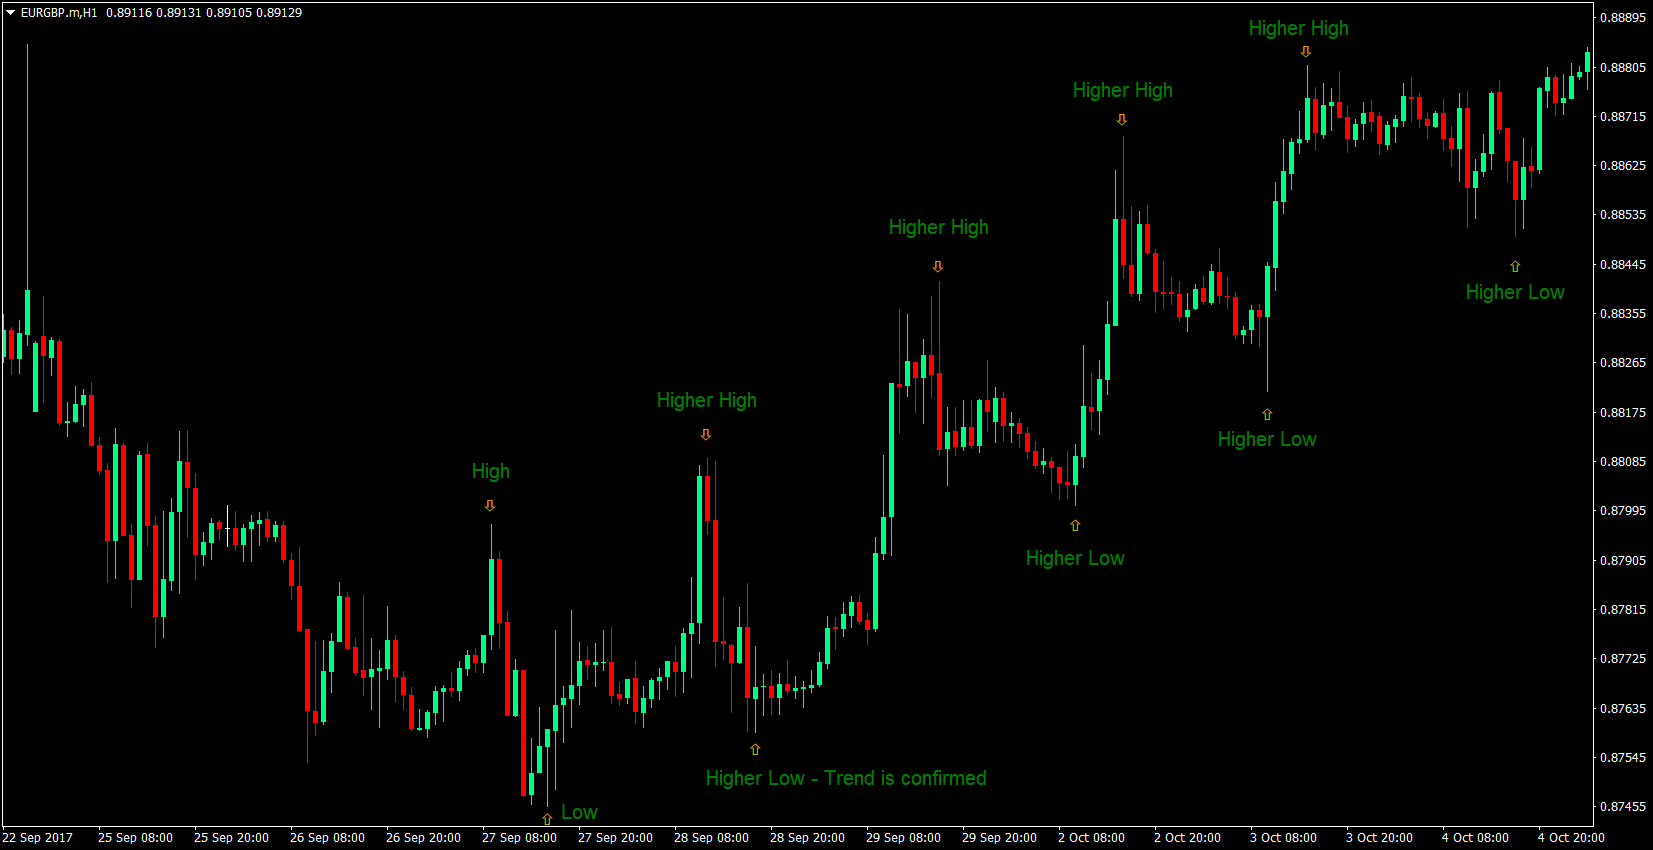 Indicadores forex mt4 price cest quoi forex charts